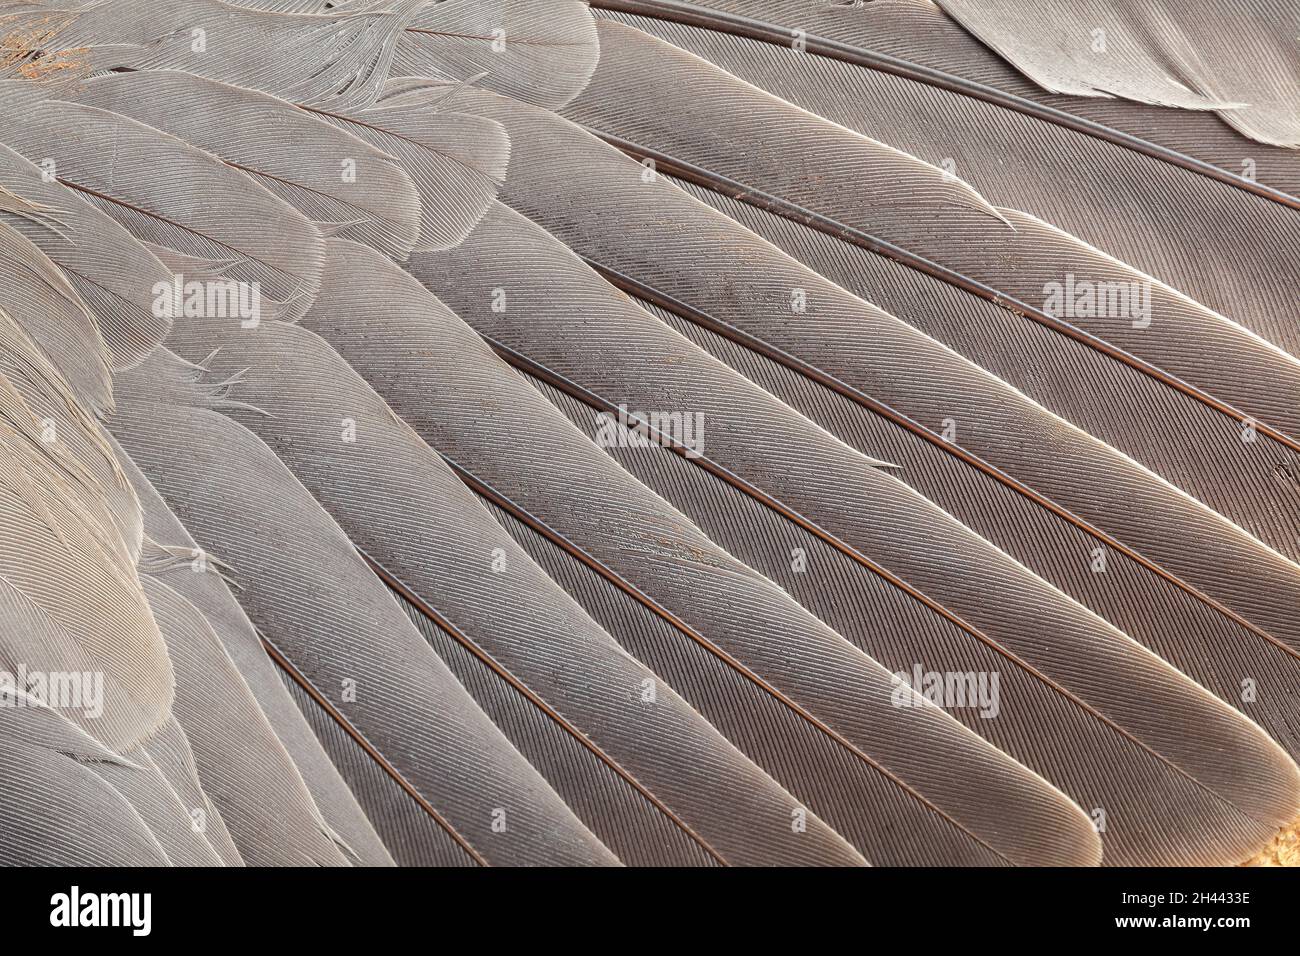 Feather pattern in high magnification closeup Stock Photo